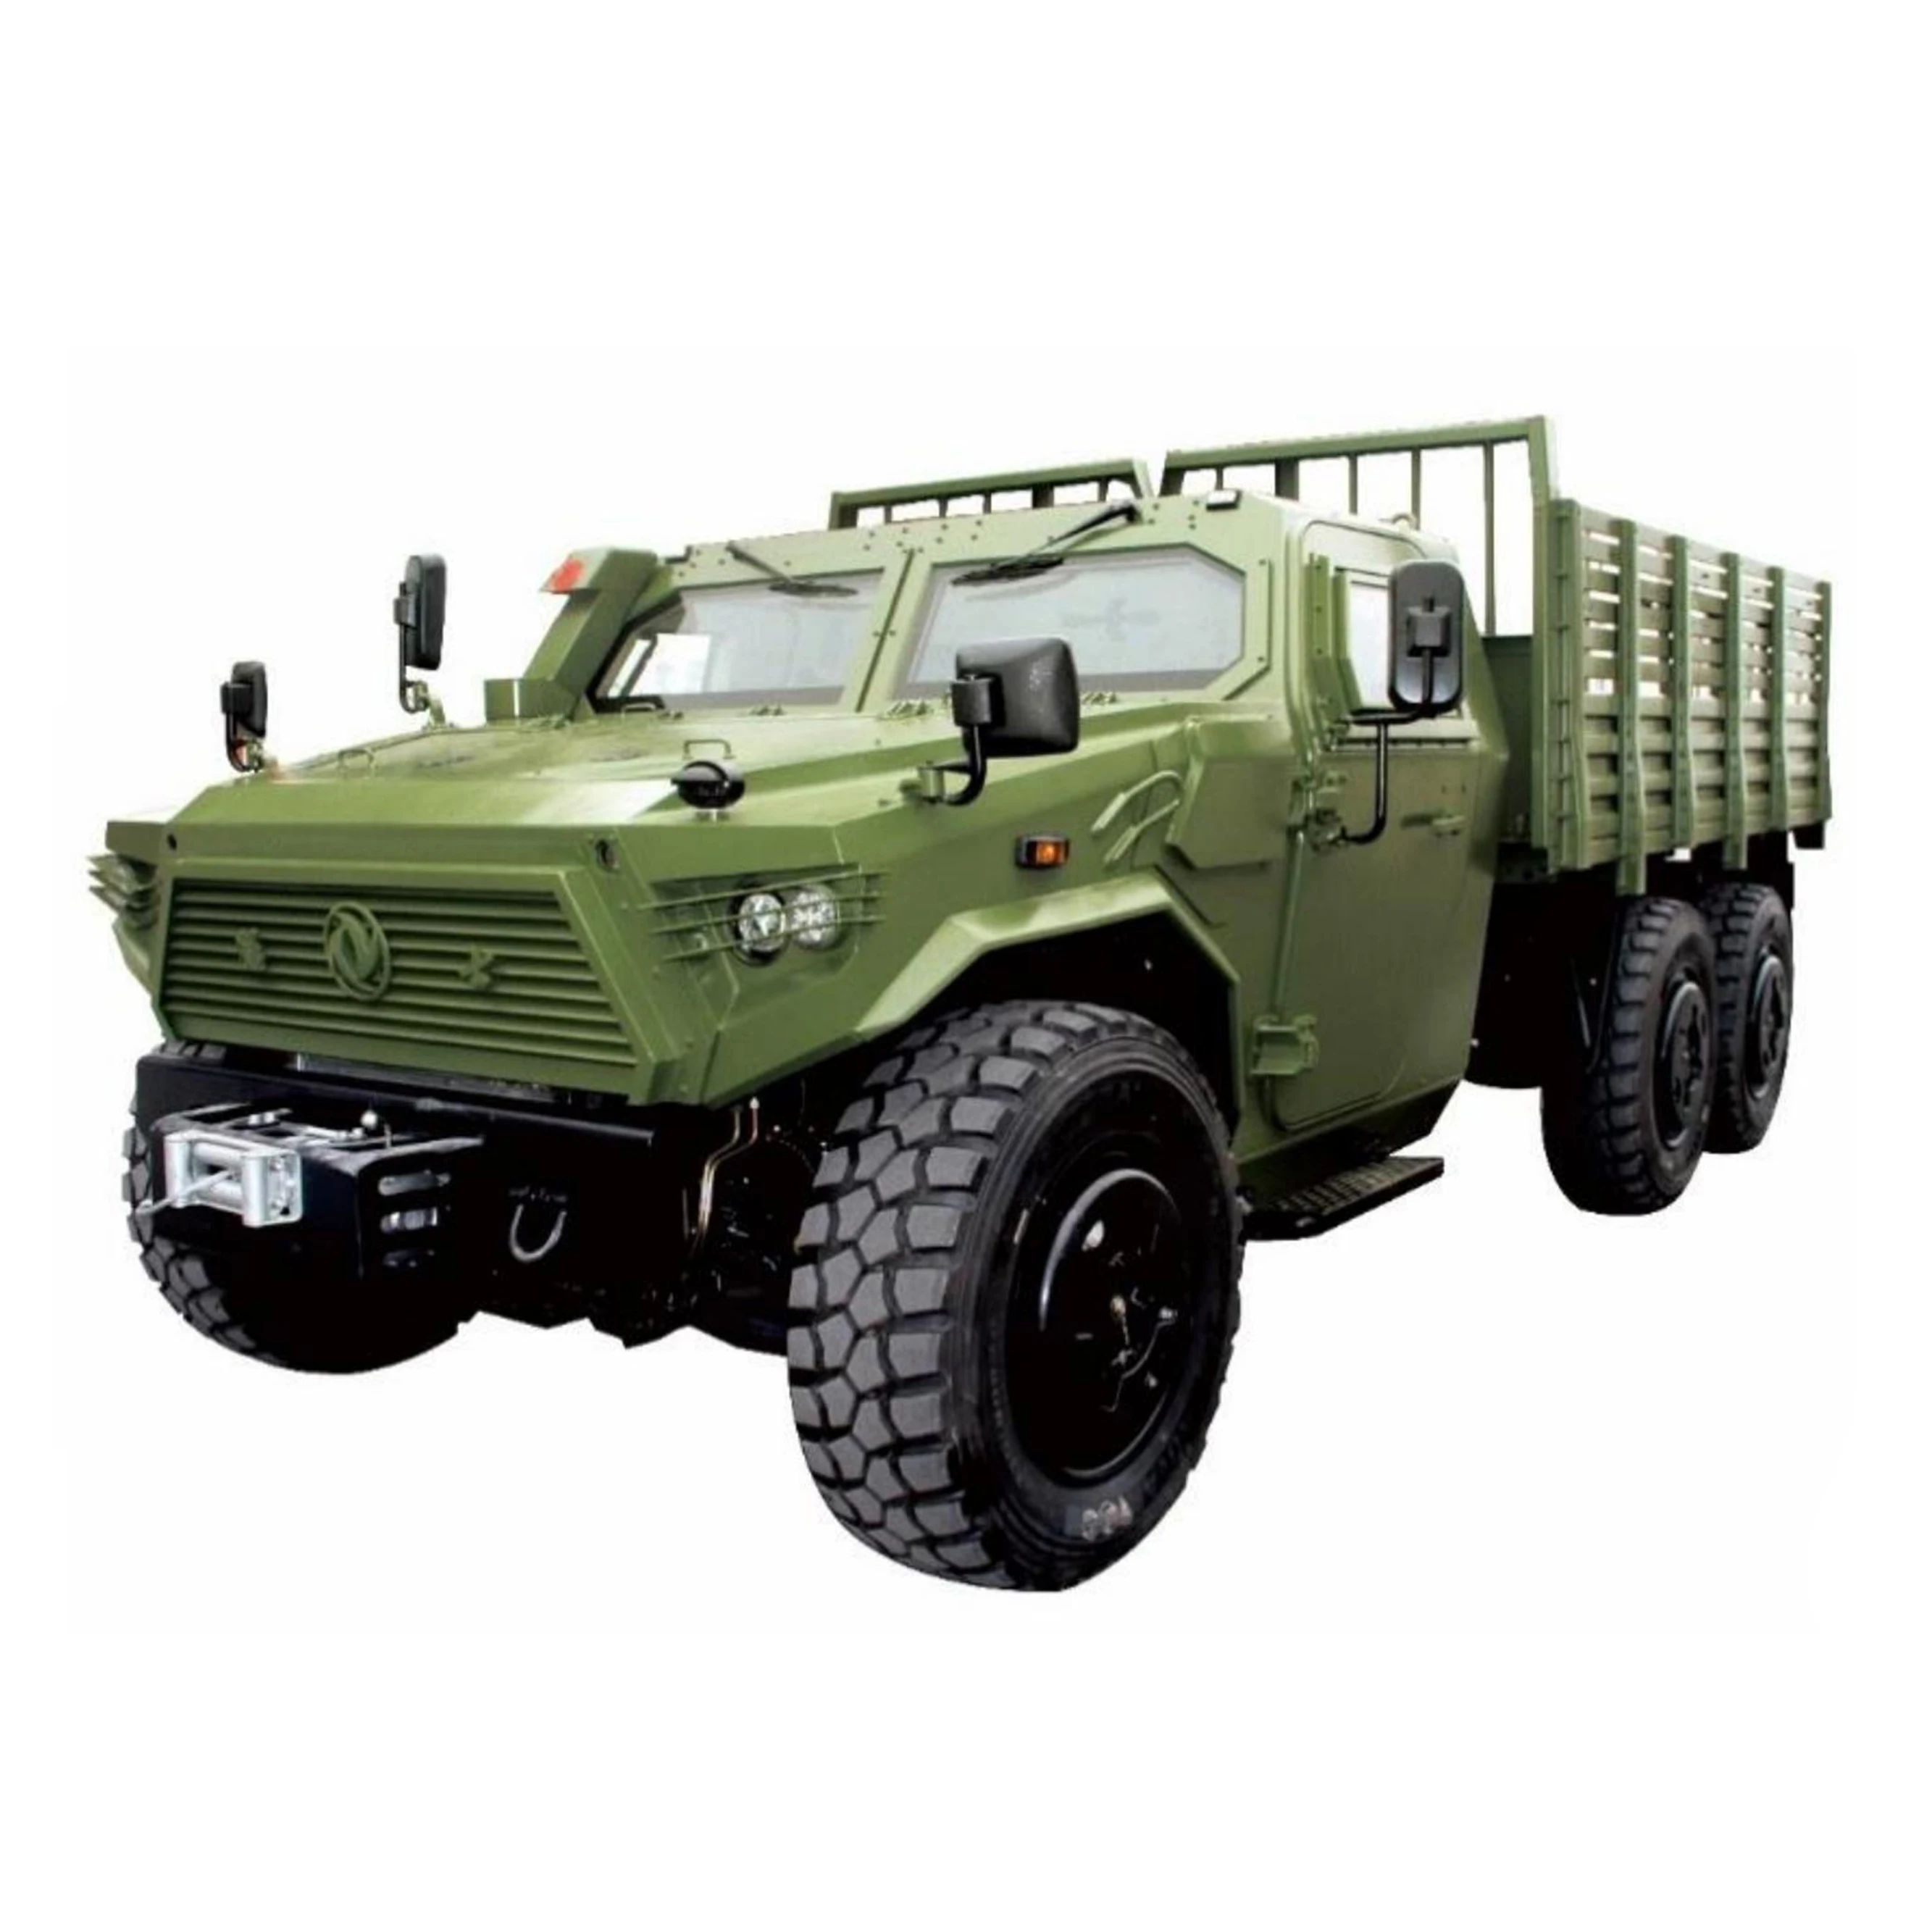 DONGFENG 4X4 trucks ORV truck off road army truck DFYY2101EB (1600583485914)